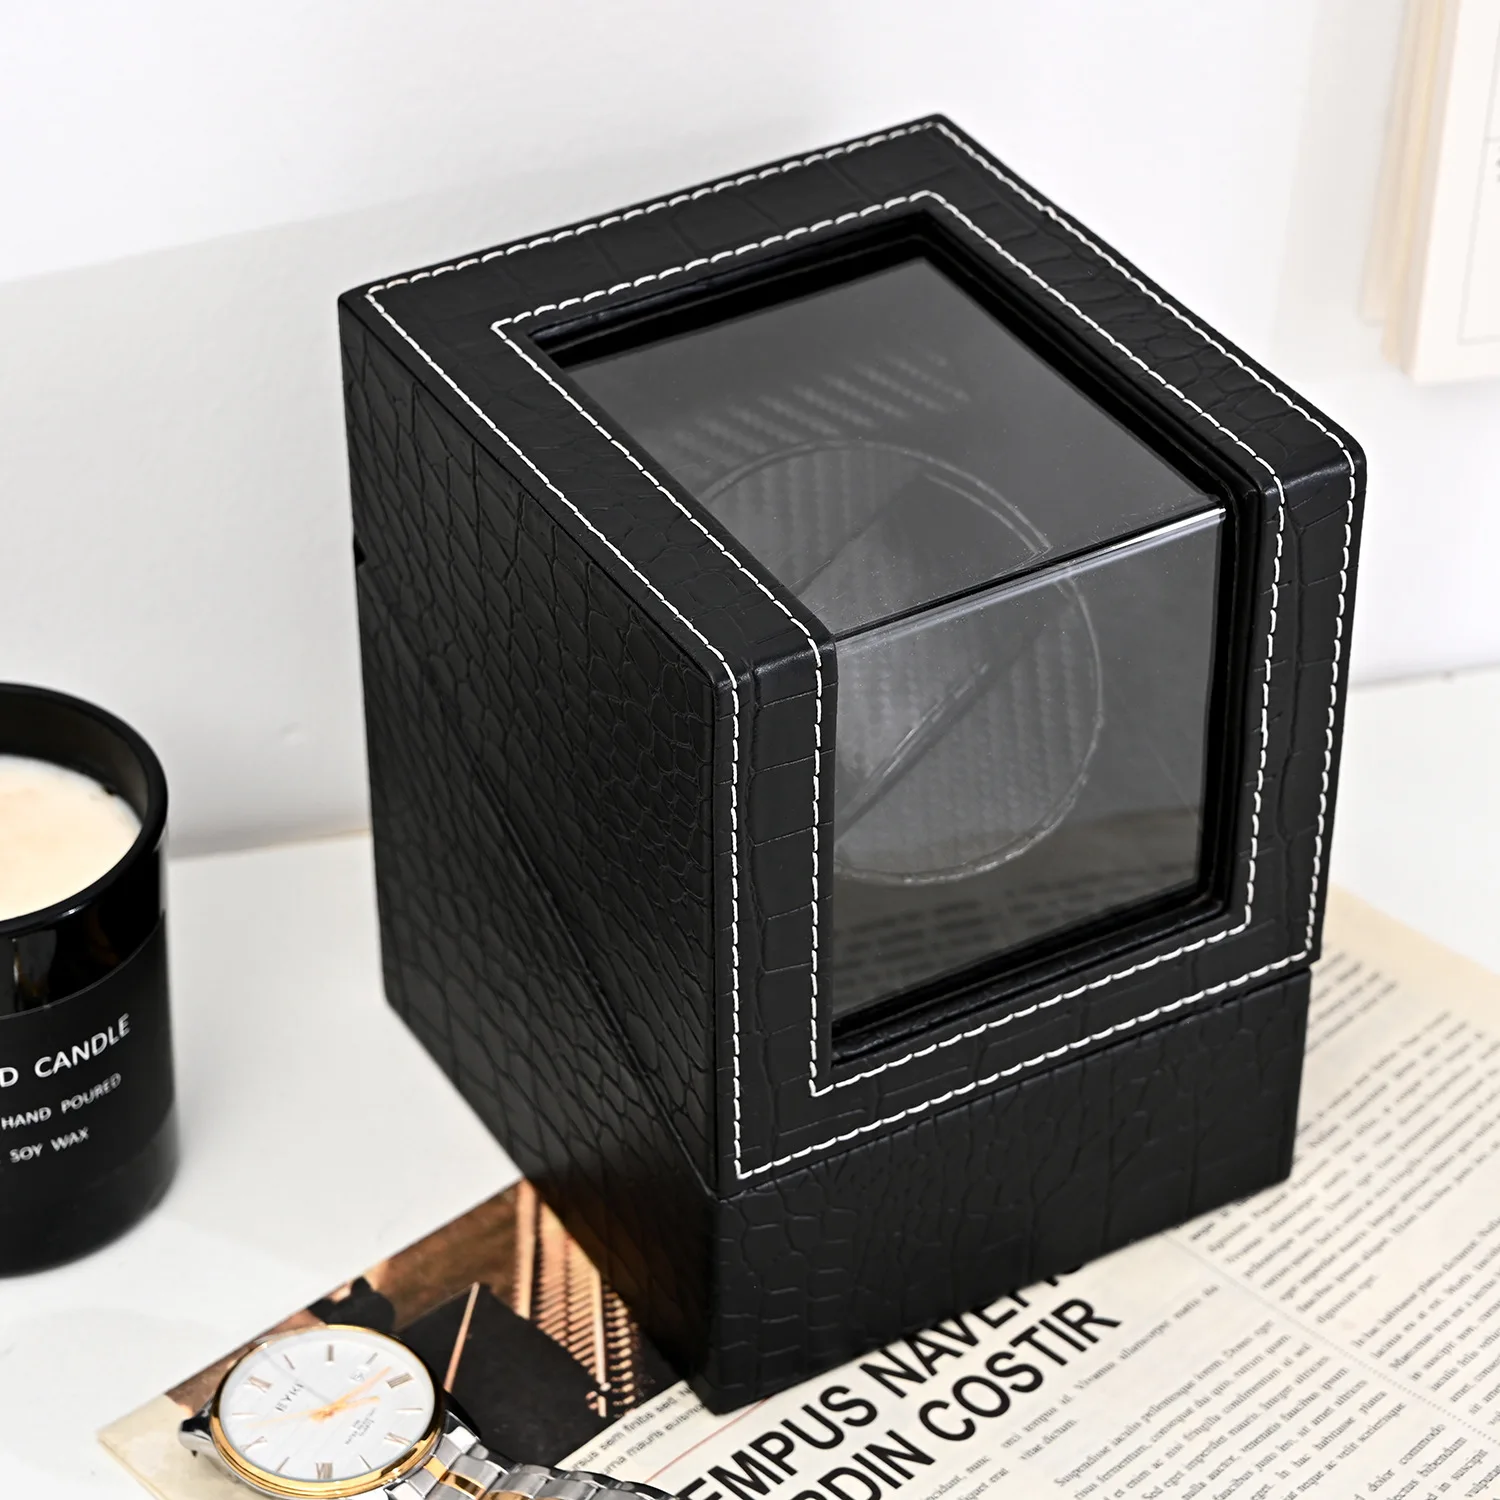 

Watch Winder For Automatic Watches Motor Shaker Rotating Watch Winders Holder Automatic Mechanical Watch Winding Box Collect Box